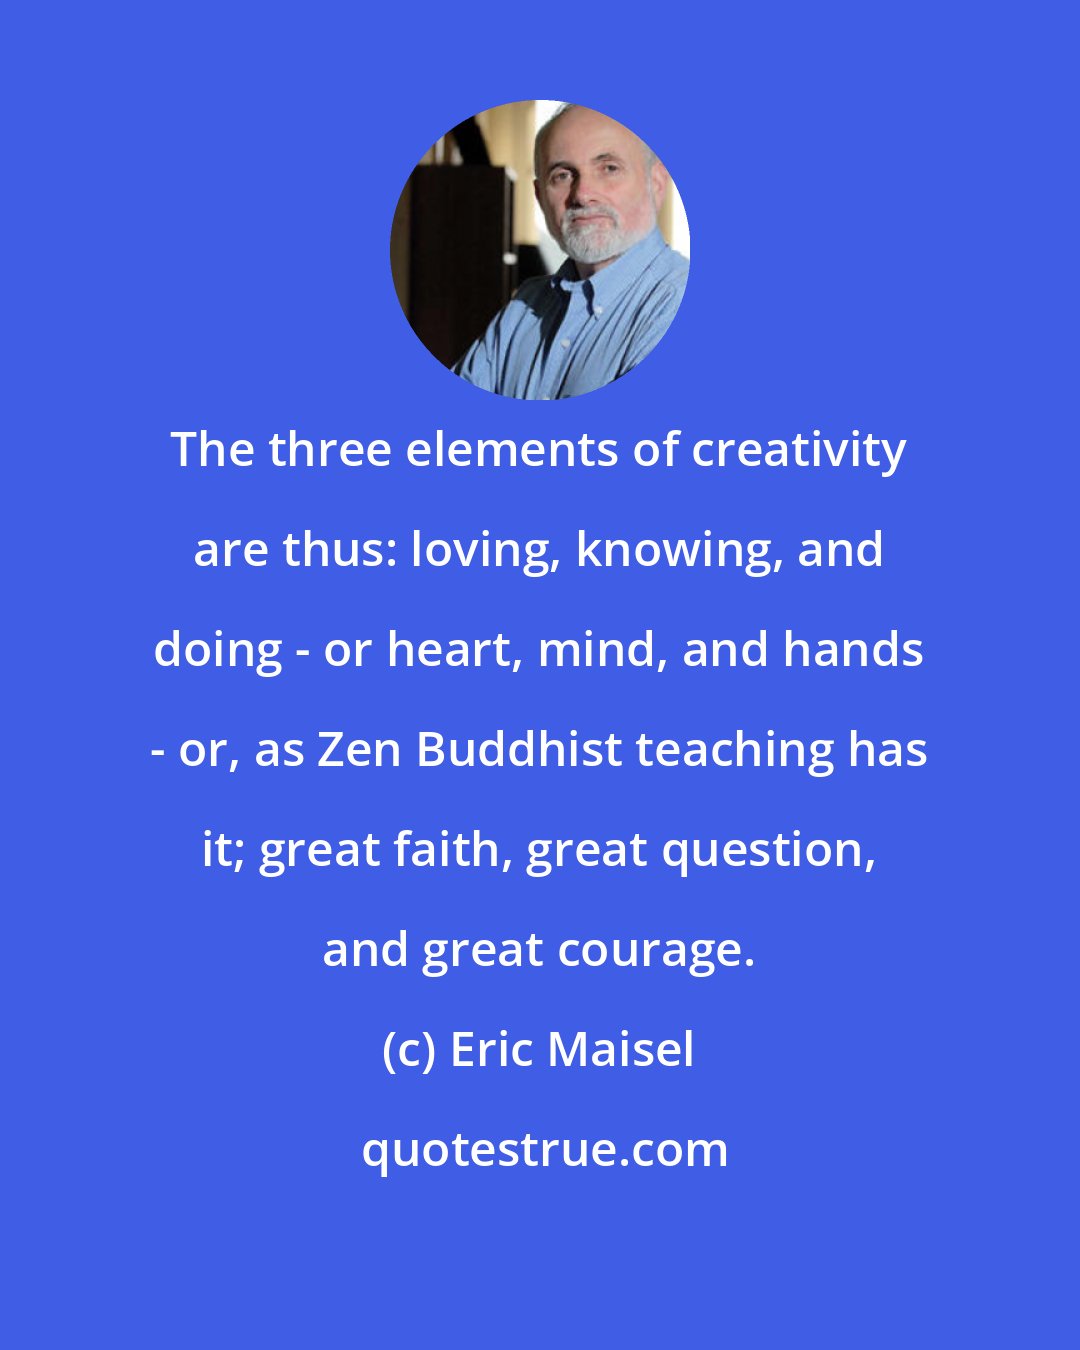 Eric Maisel: The three elements of creativity are thus: loving, knowing, and doing - or heart, mind, and hands - or, as Zen Buddhist teaching has it; great faith, great question, and great courage.